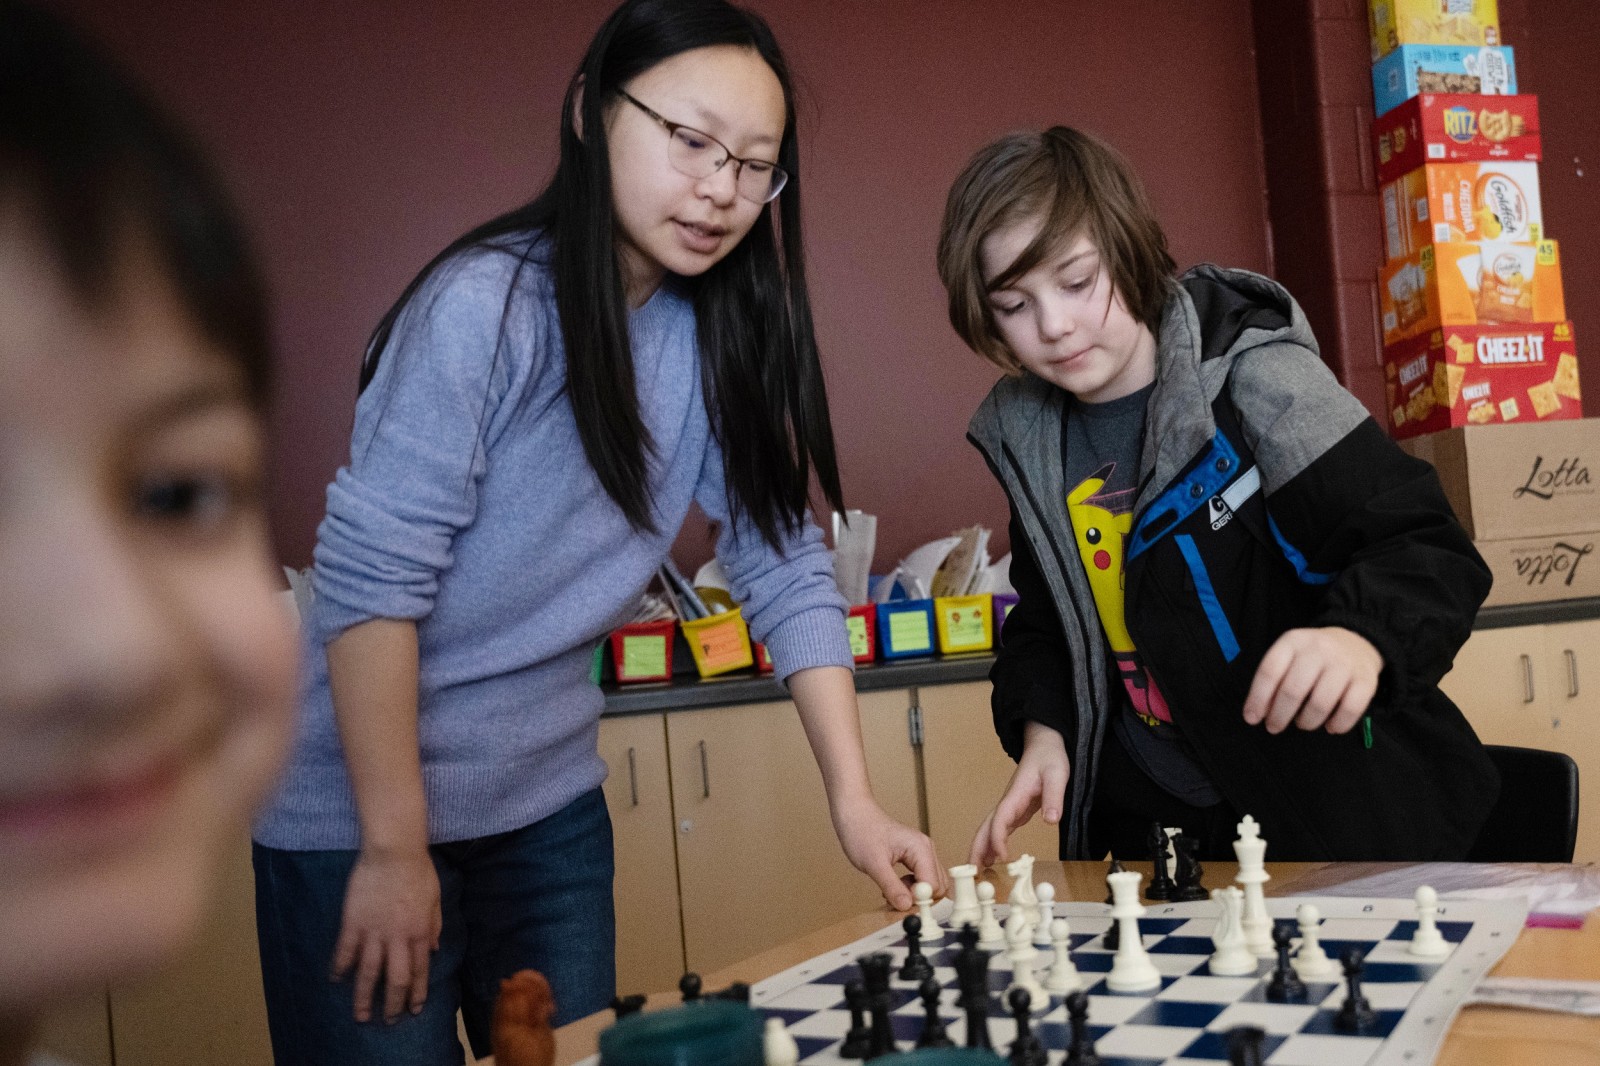 County chess club provides positive role models, diversions for adolescents  · The Badger Herald